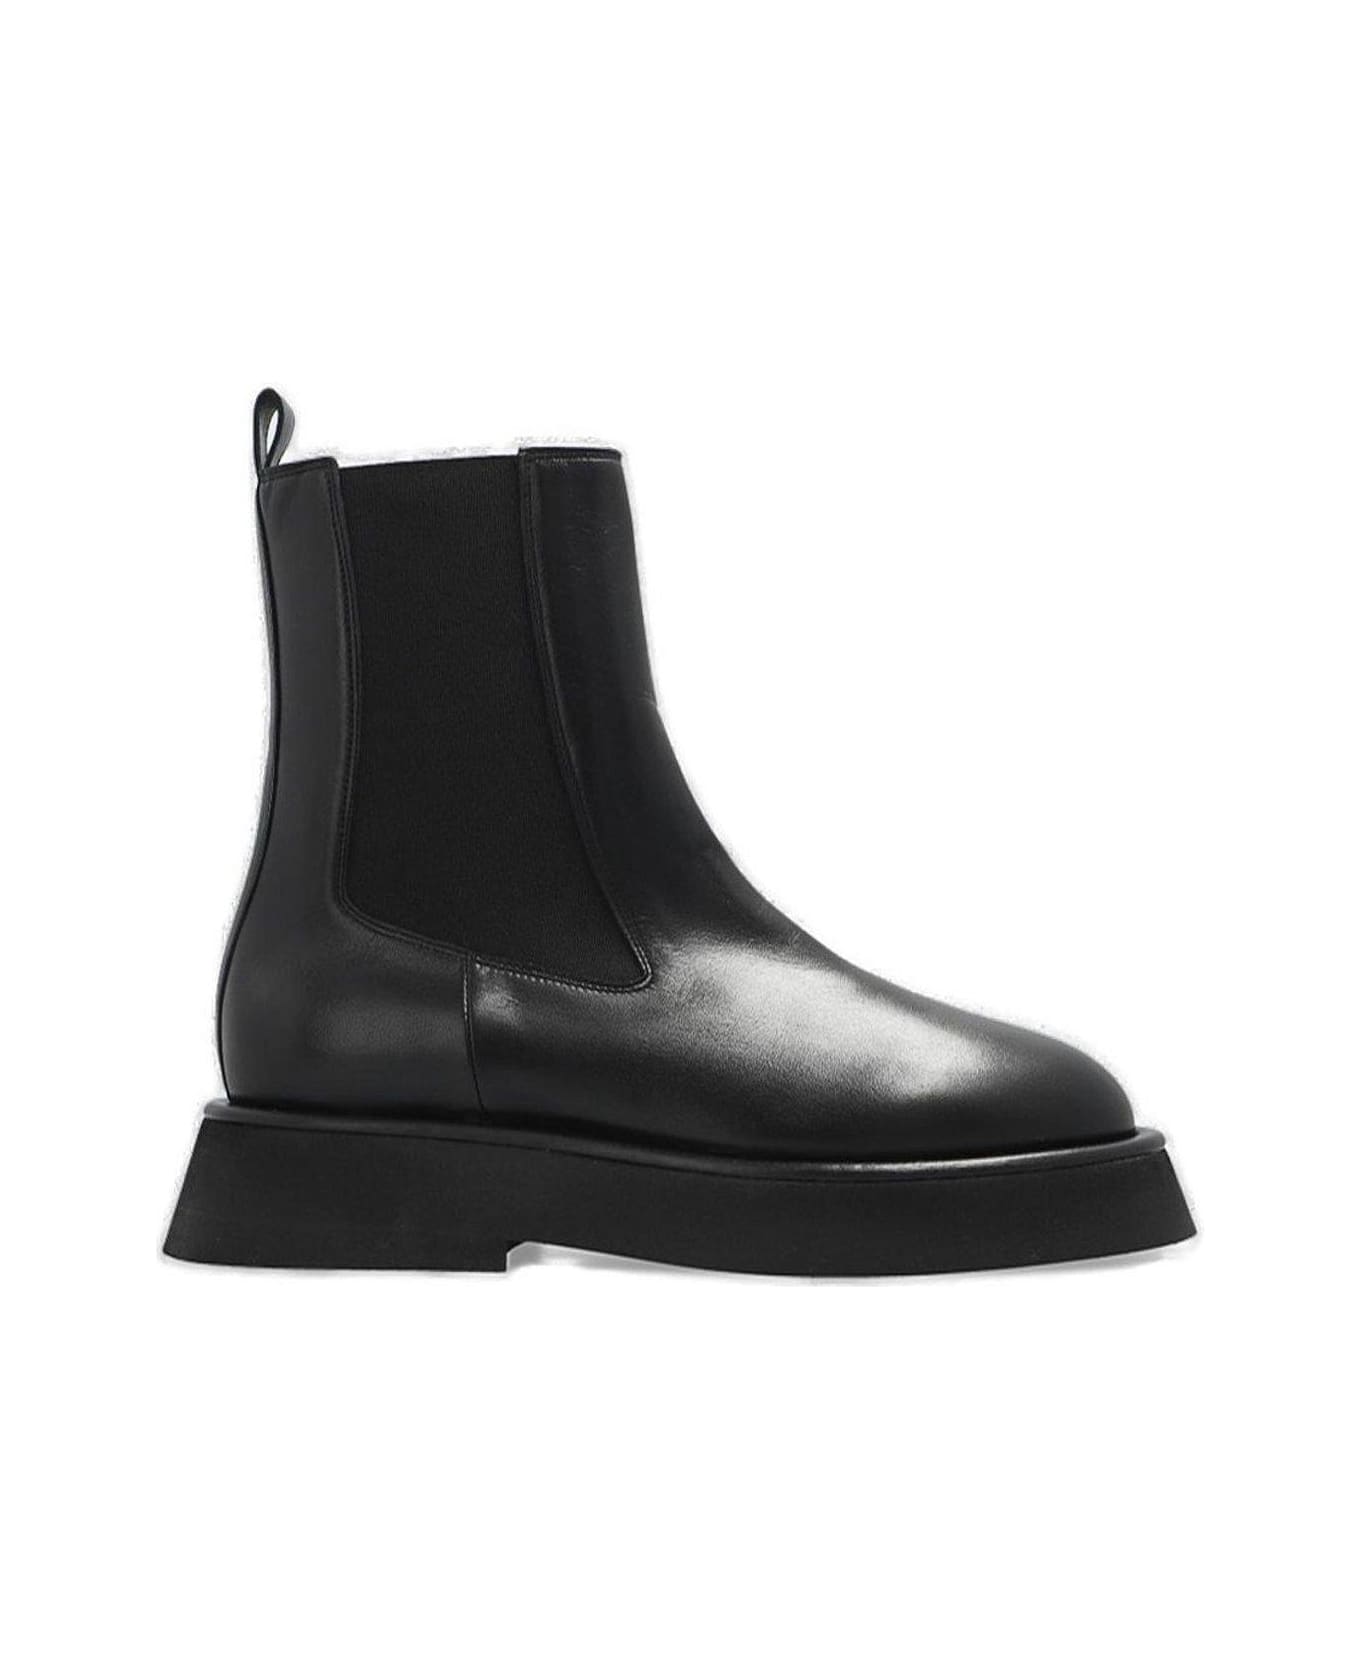 Wandler Panelled Ankle Boots - Black